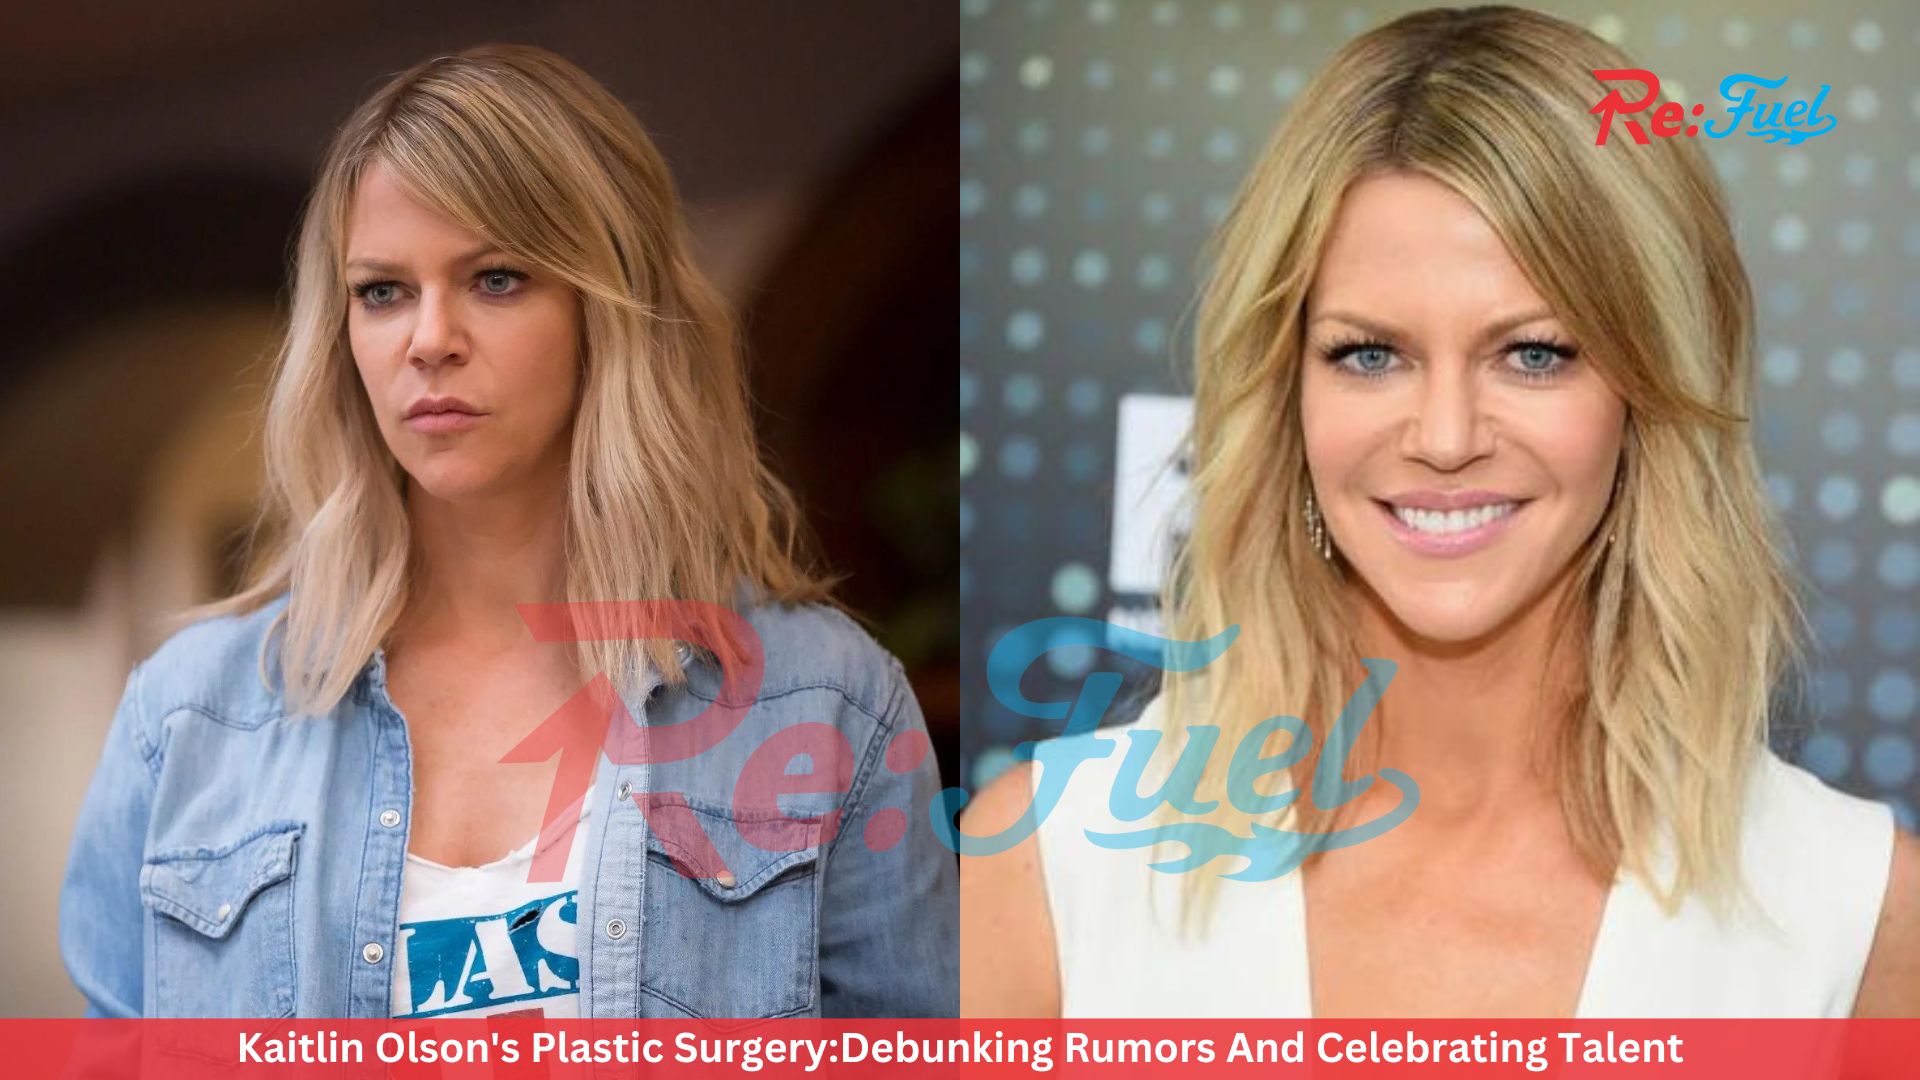 Kaitlin Olson's Plastic Surgery:Debunking Rumors And Celebrating Talent